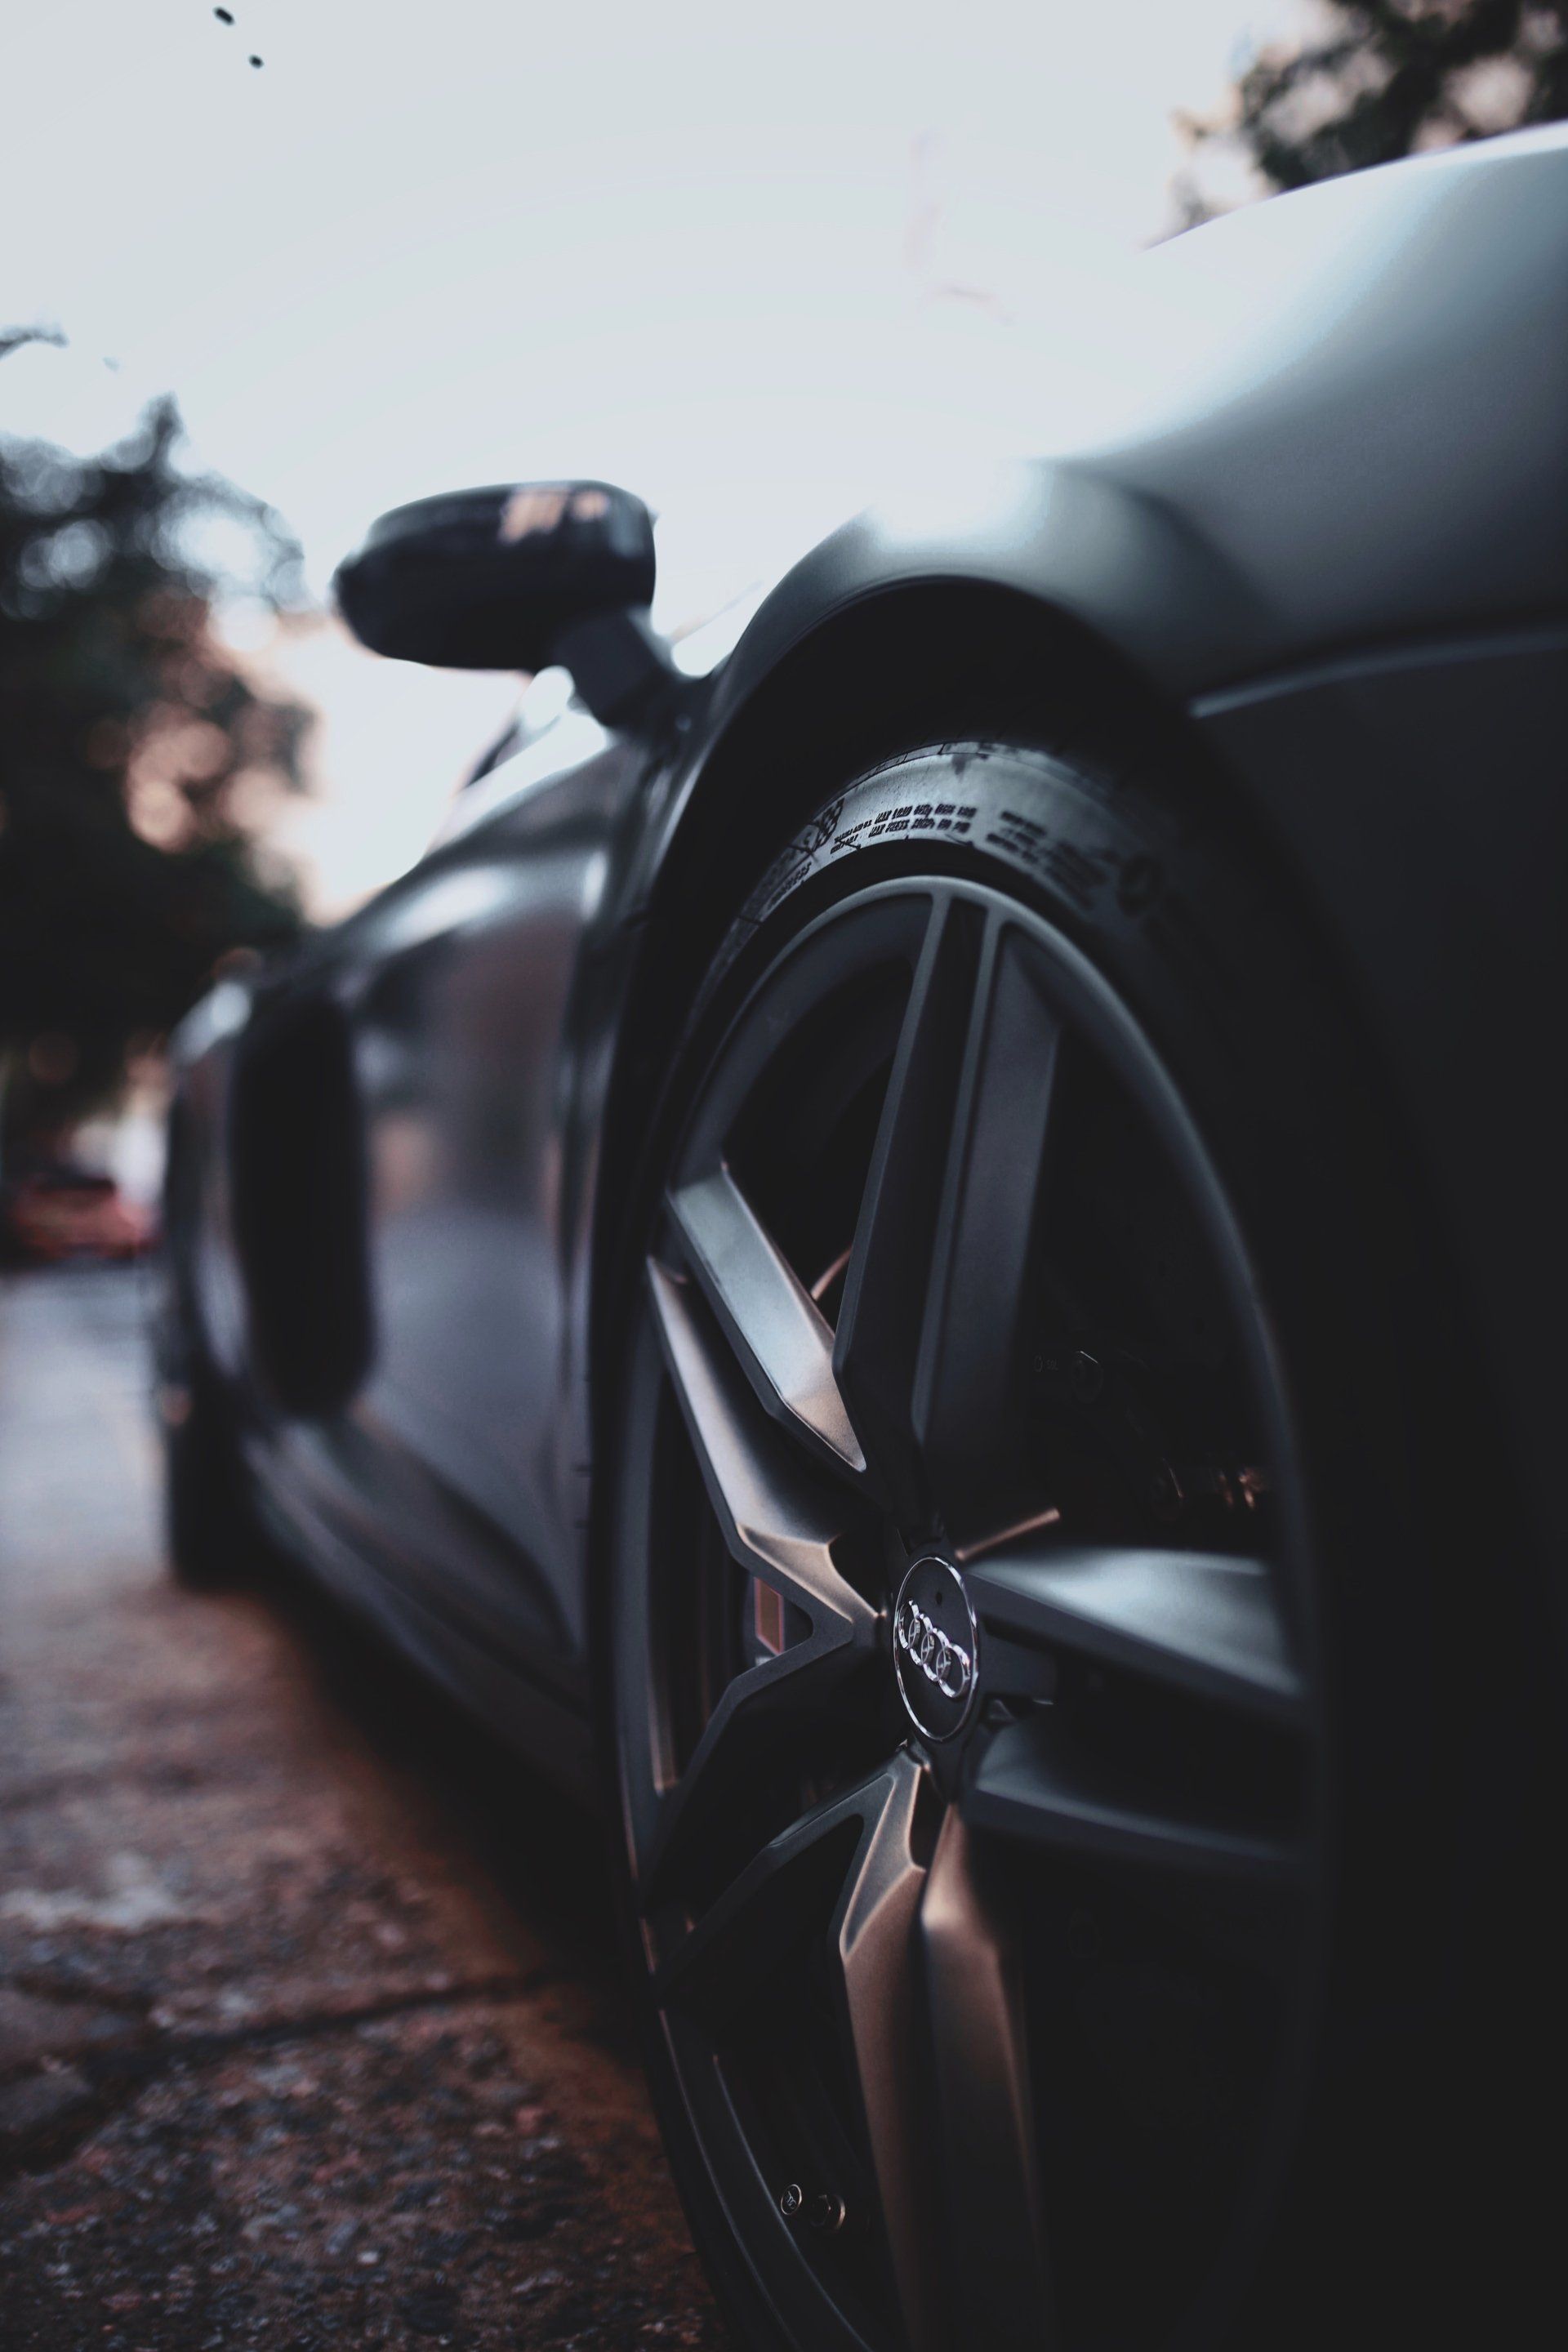 a close up of a car 's wheel and tire